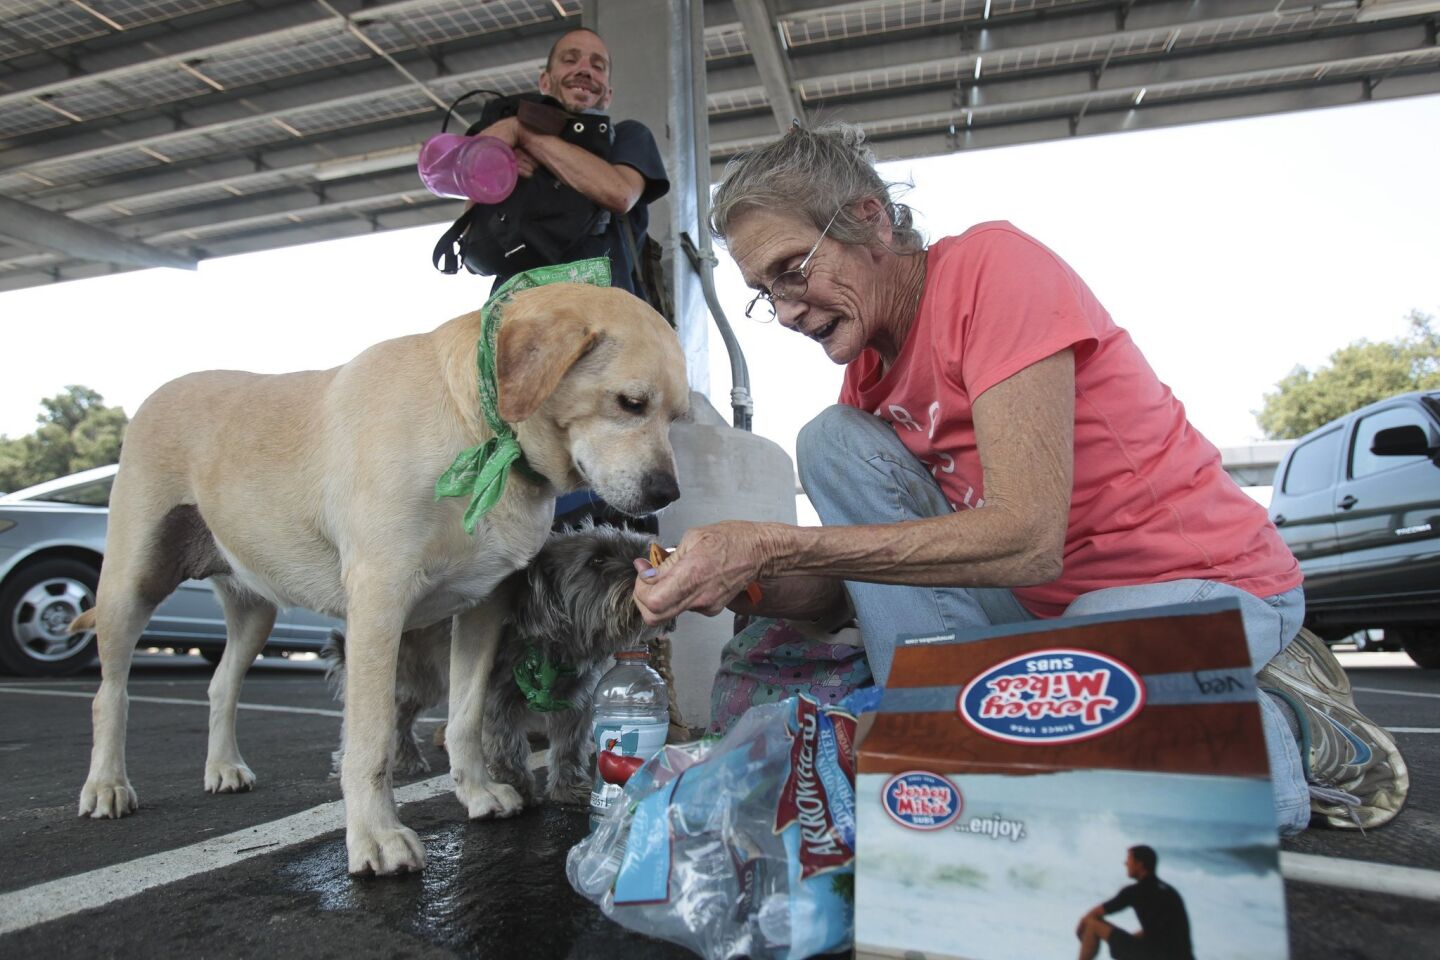 Helen Quick feeds Gucci, owned by her son Richard Miner, background, food that she and her son had received at Mountain Empire High School in Pine Valley, which was a temporary location for people evacuated from the wildfire near Potrero, as they wait for a ride to the new evacuee location in El C